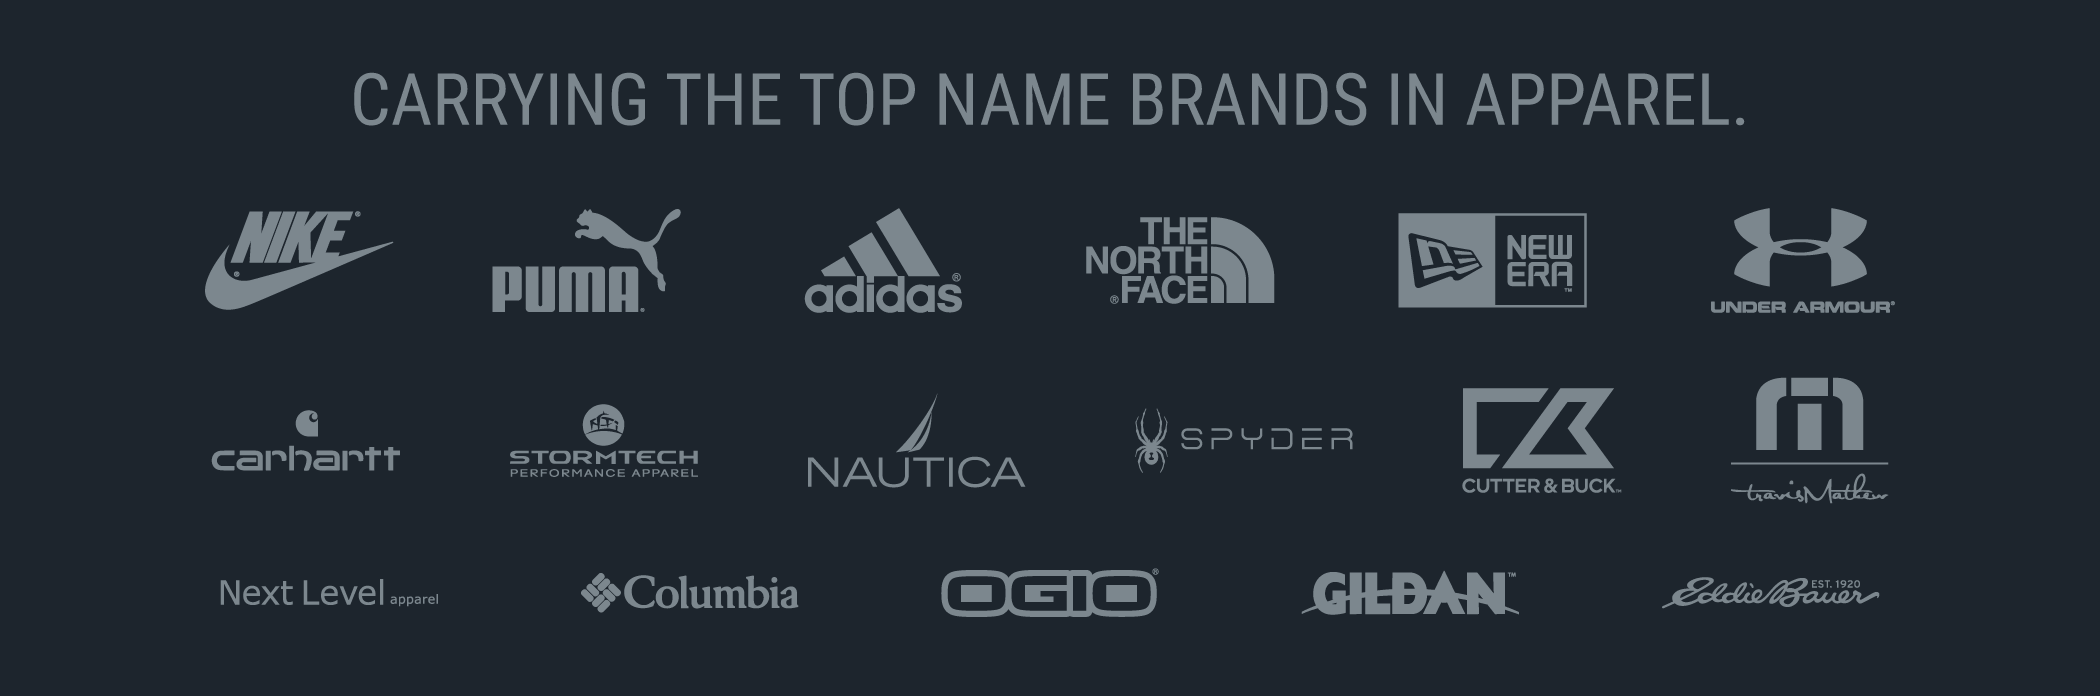 Carrying the Top Name Brands in Apparel